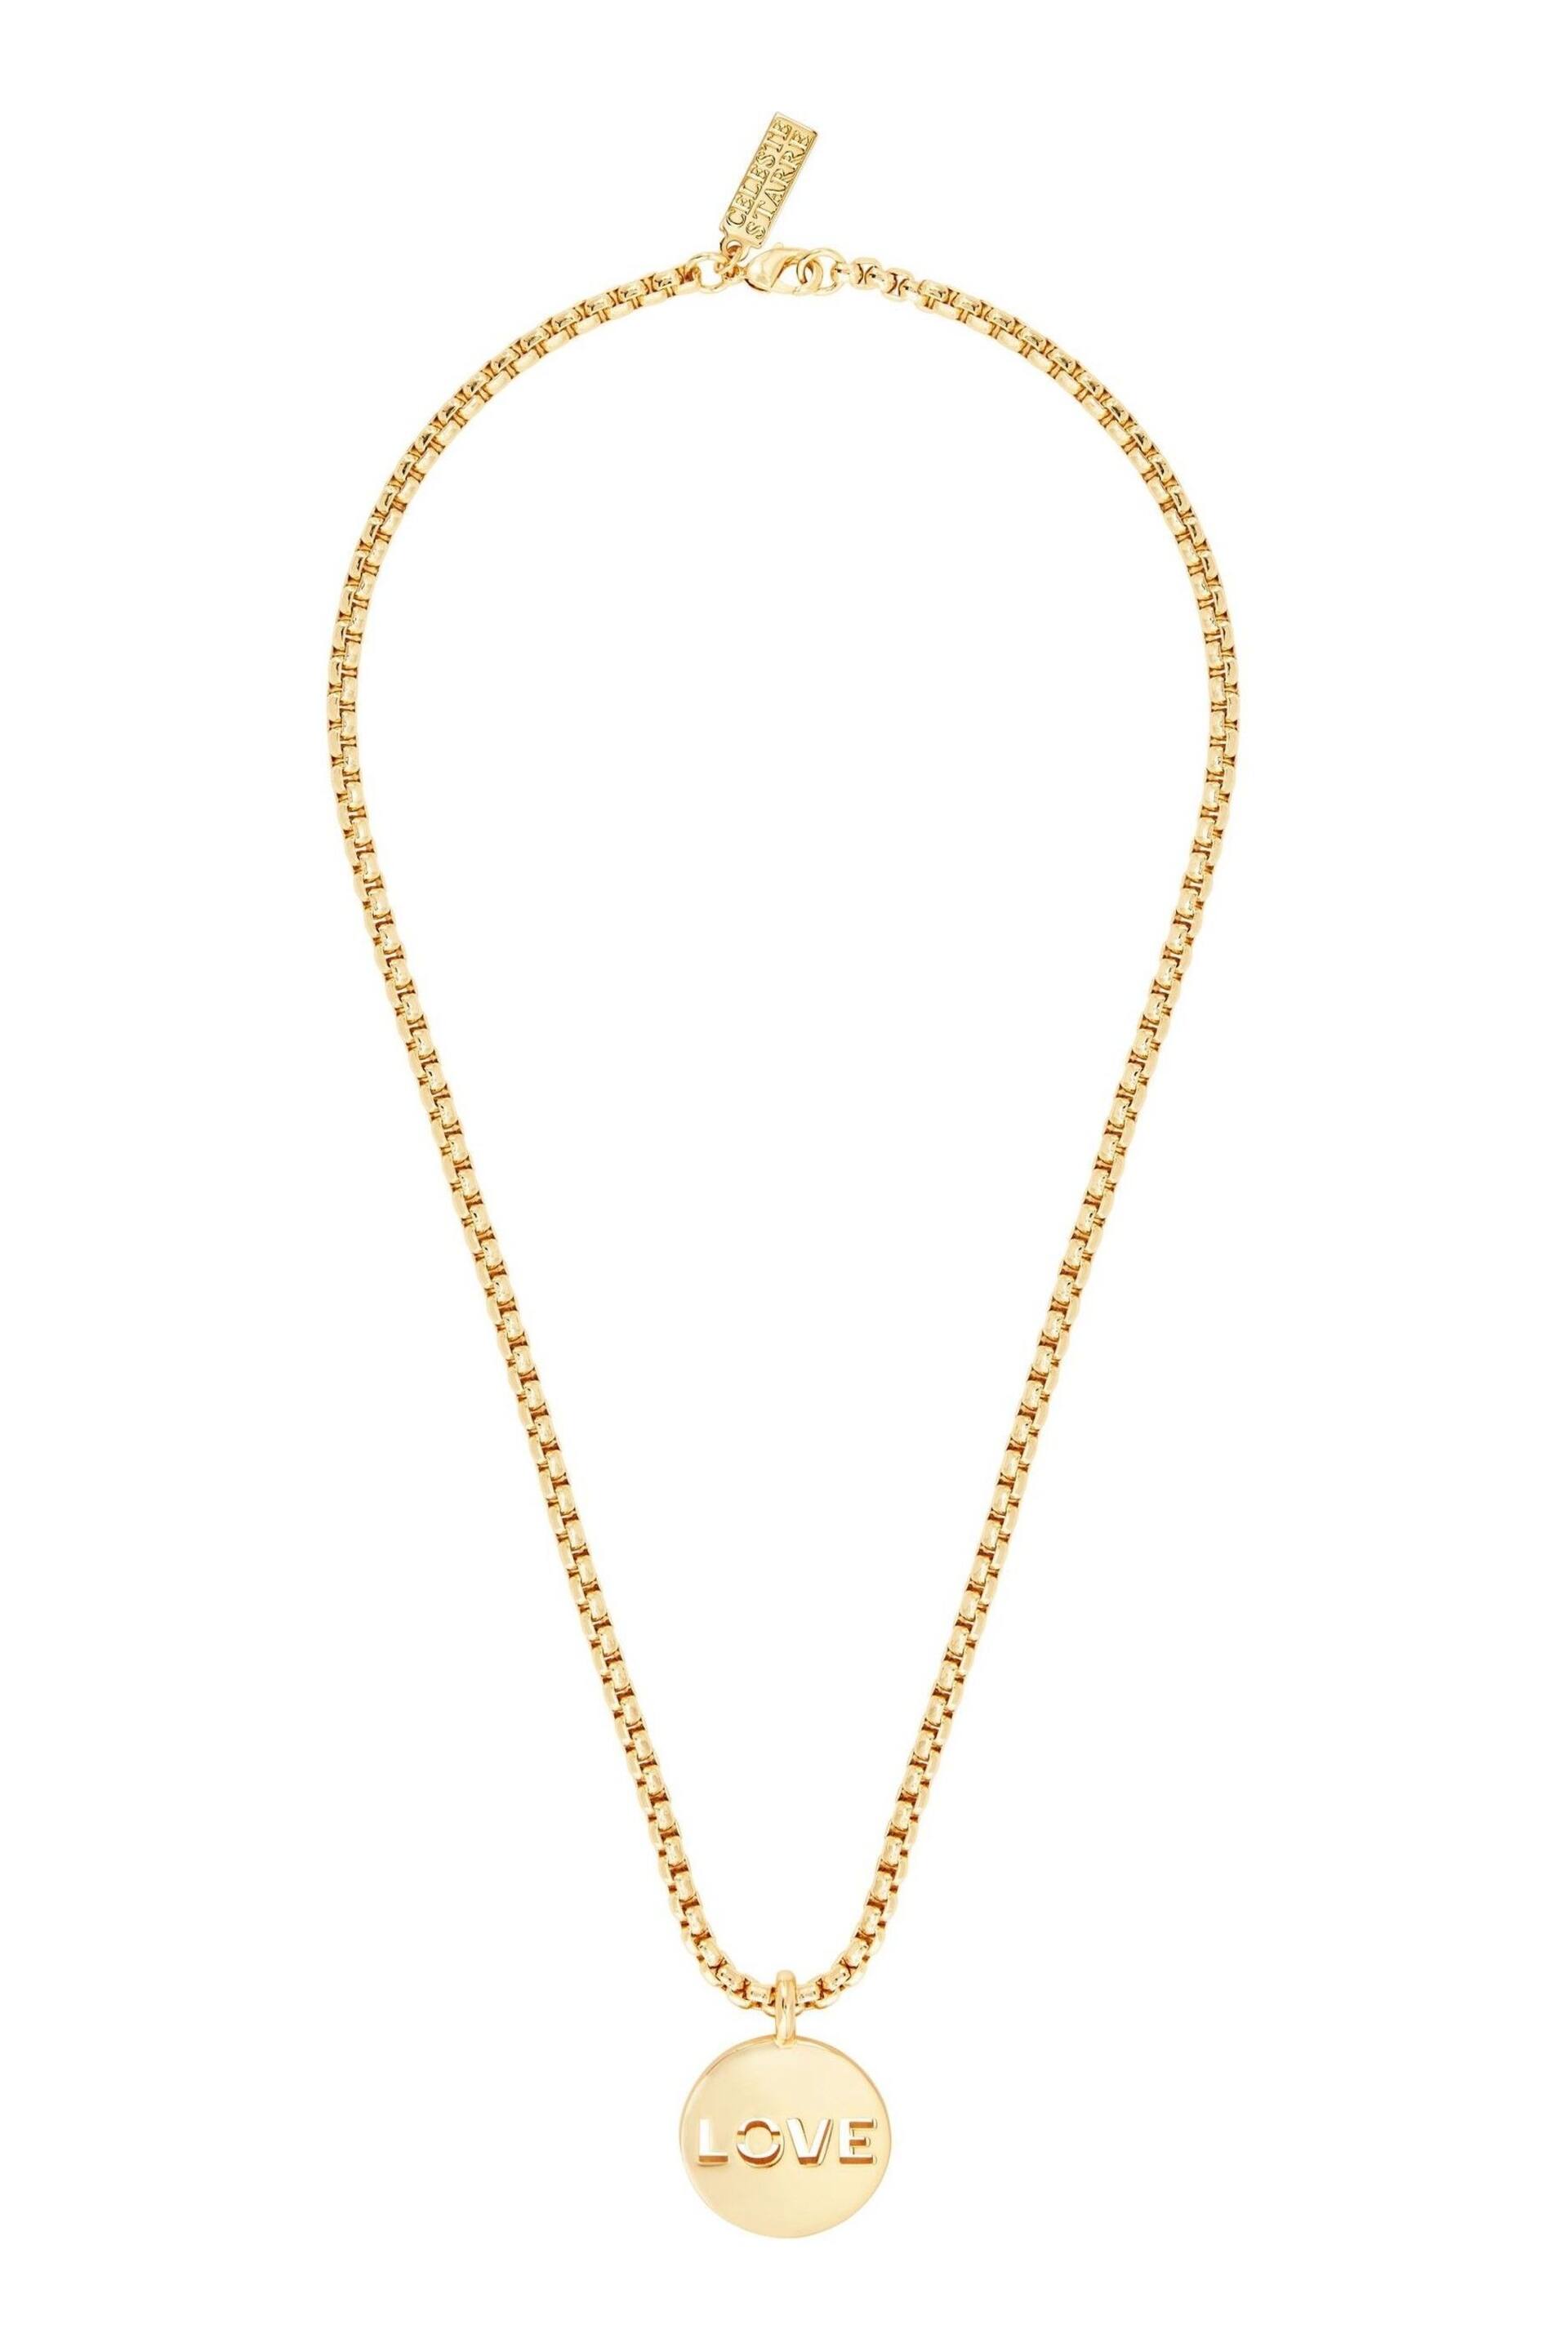 Celeste Starre Gold Tone Love Conquers All Necklace - Image 1 of 3